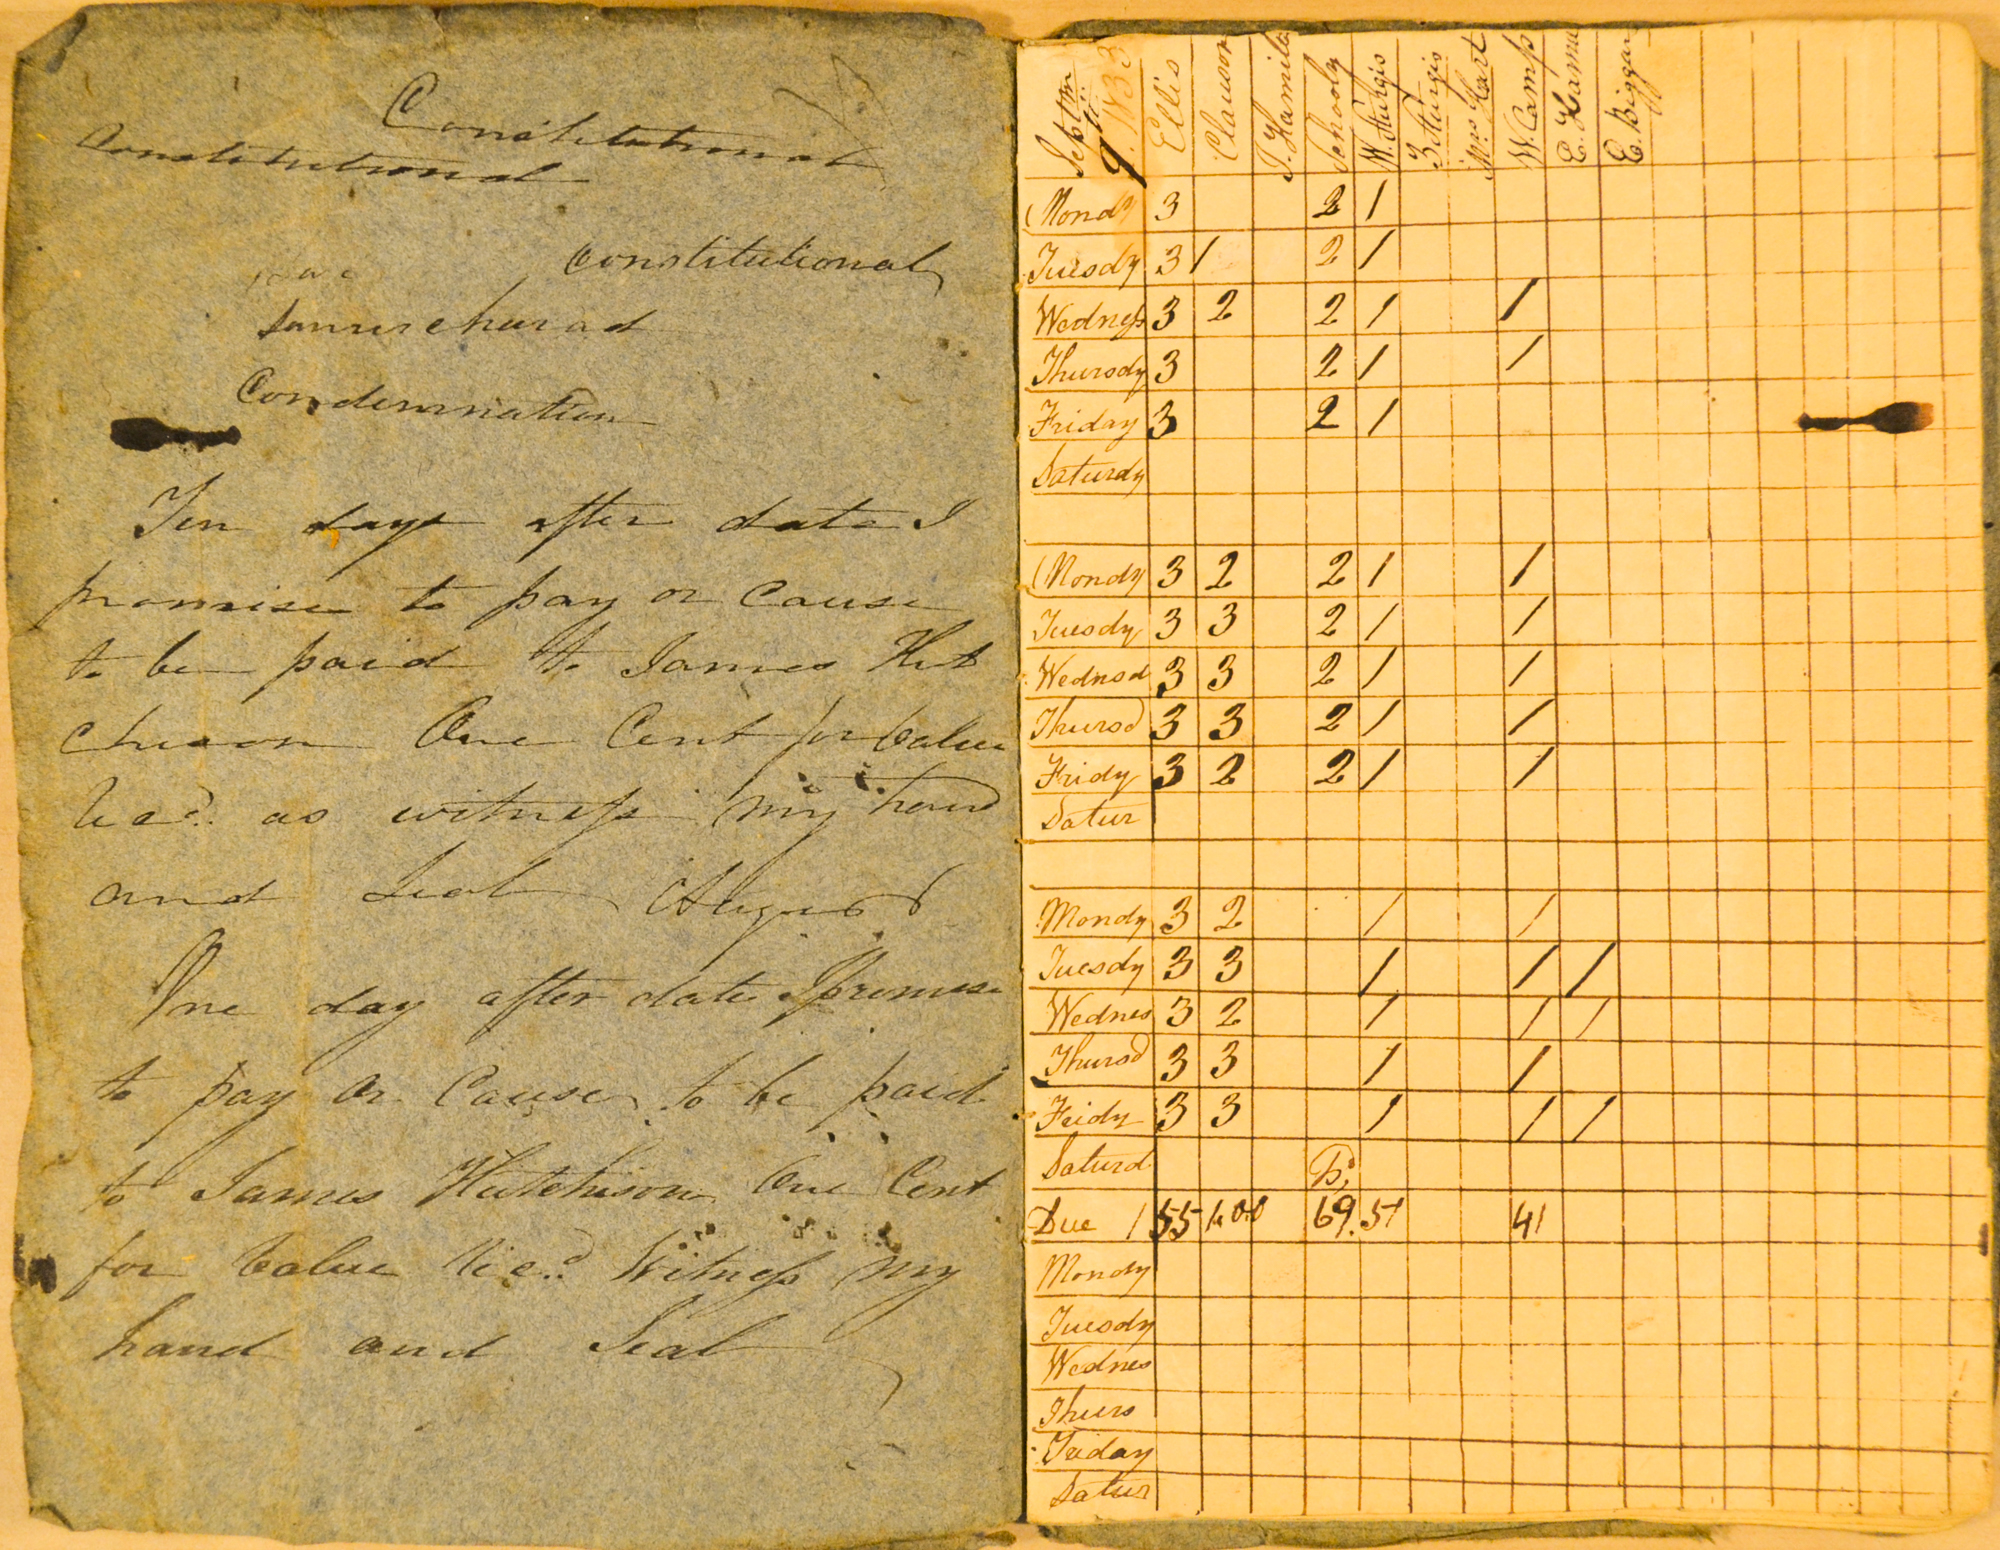 List of pupils in 1833 - see list in text, this page.